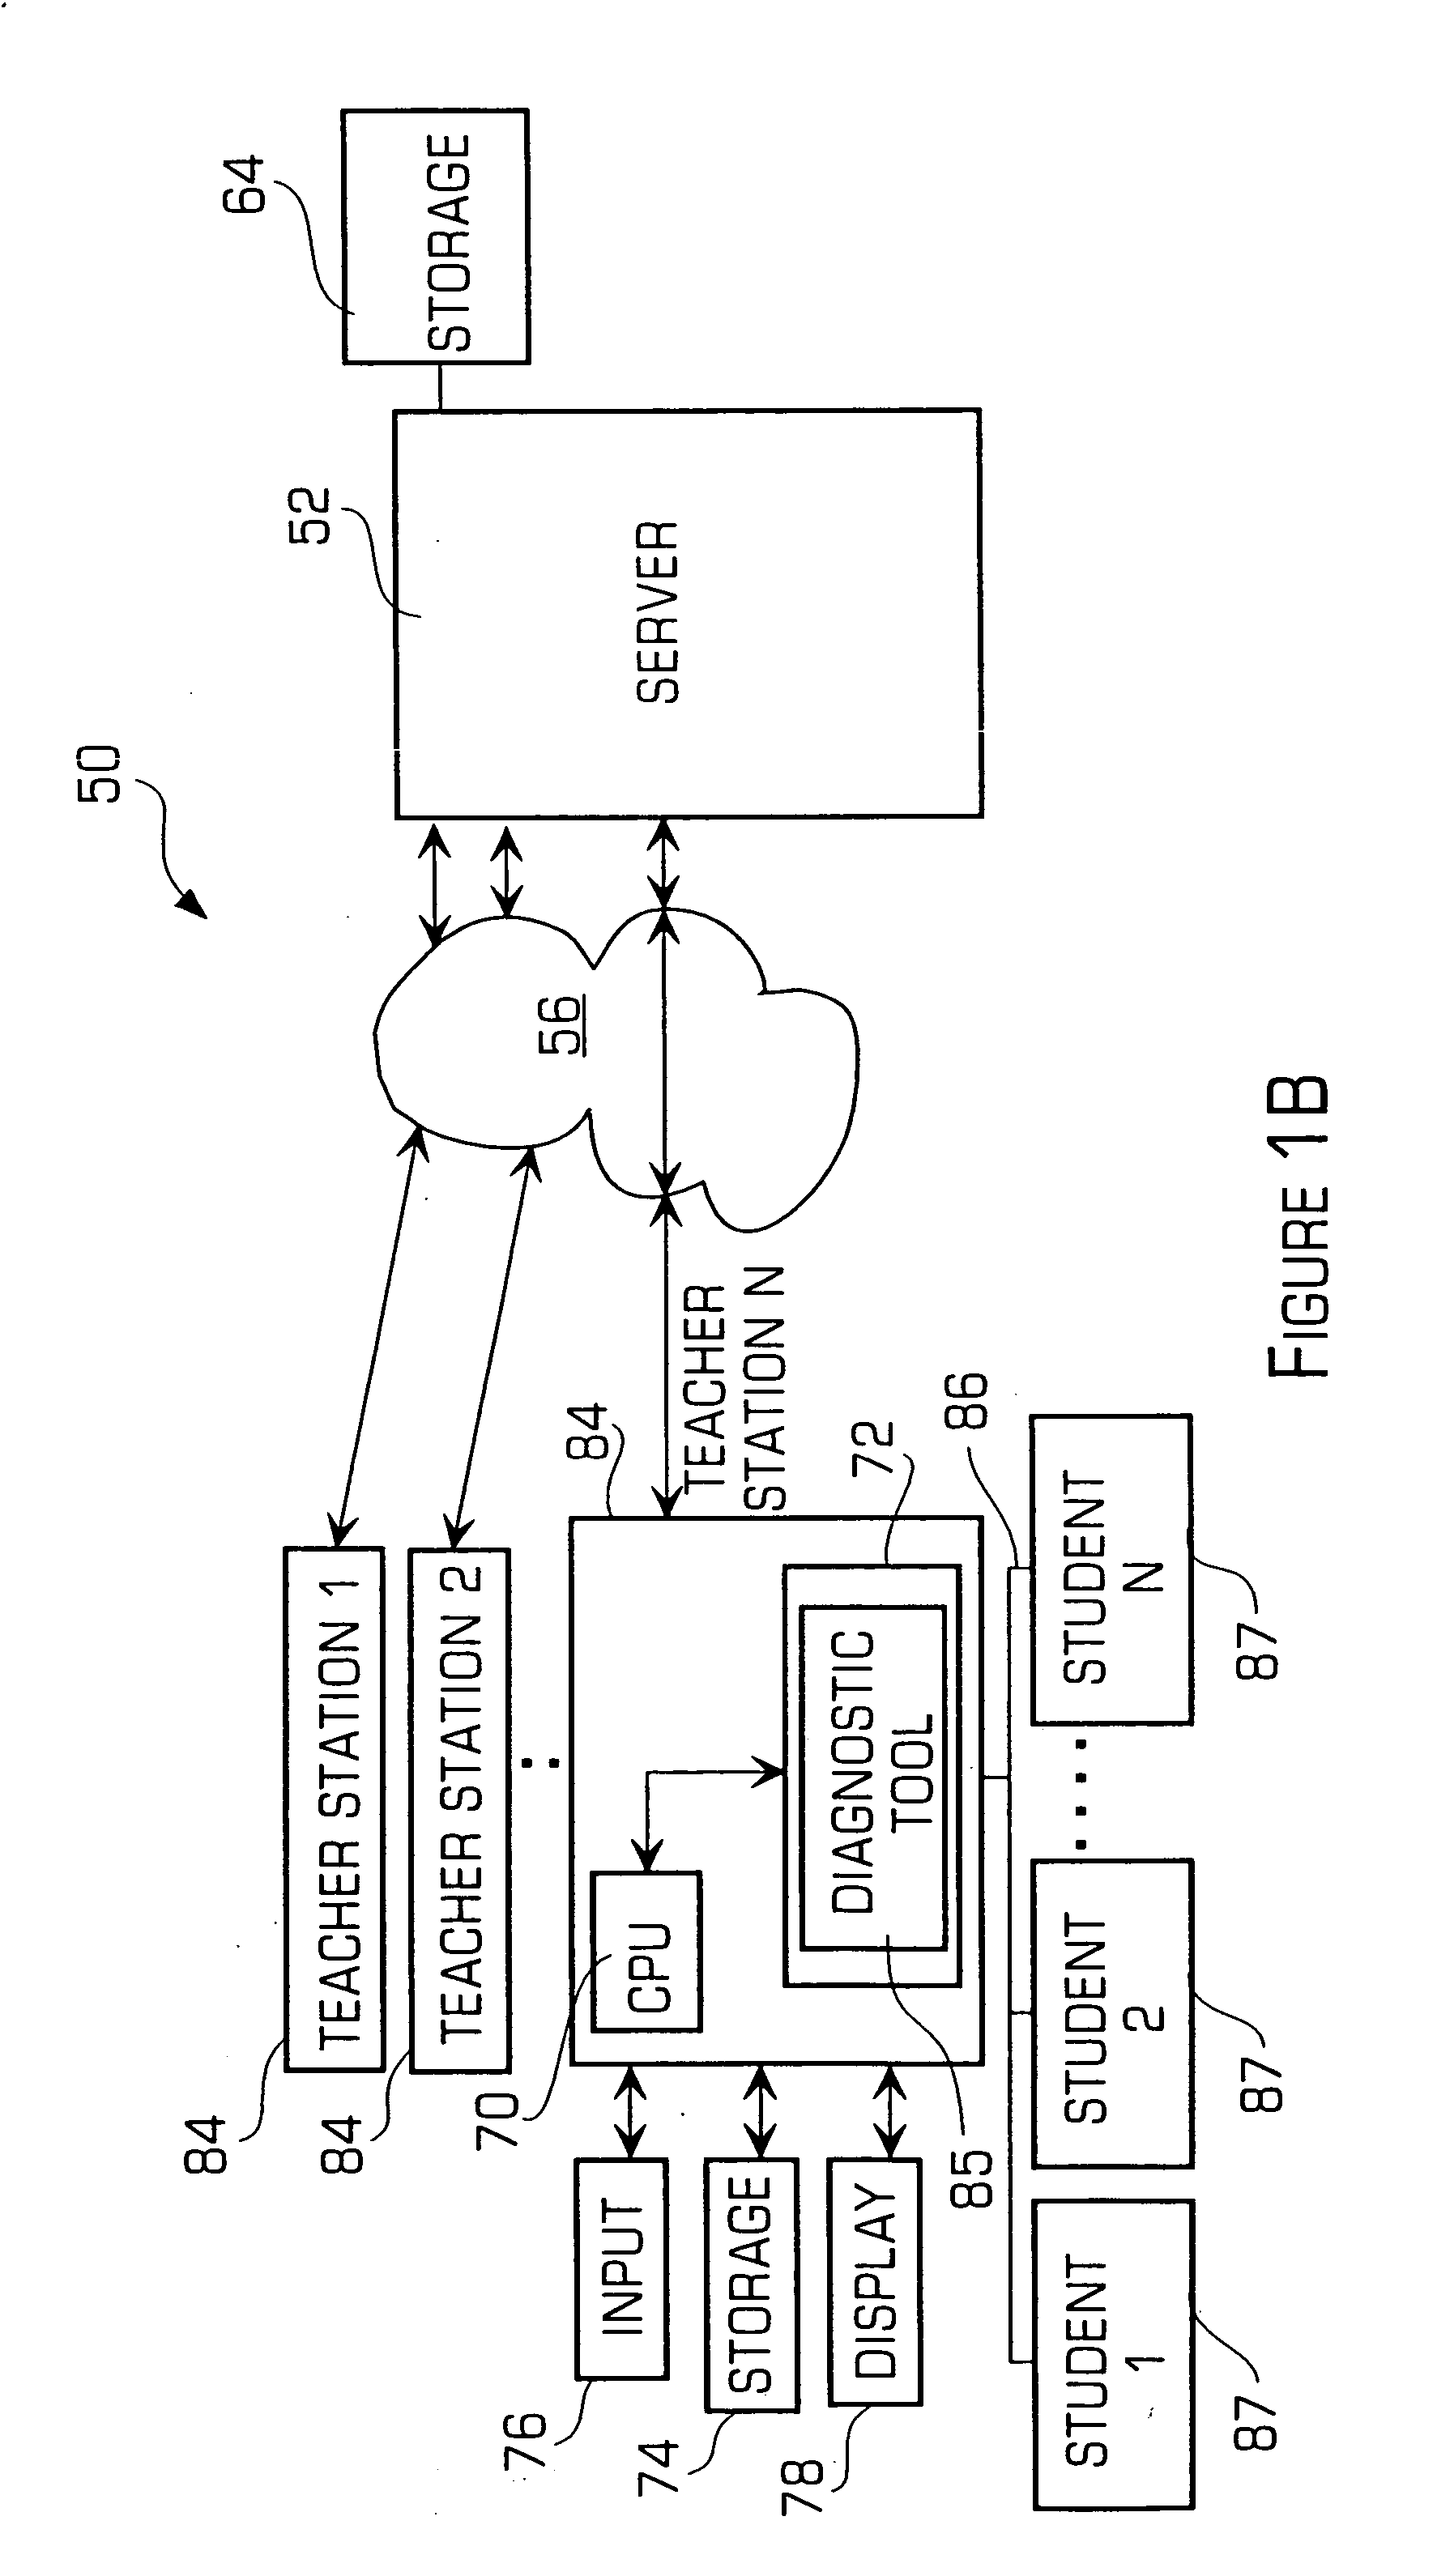 Diagnostic system and method for phonological awareness, phonological processing, and reading skill testing